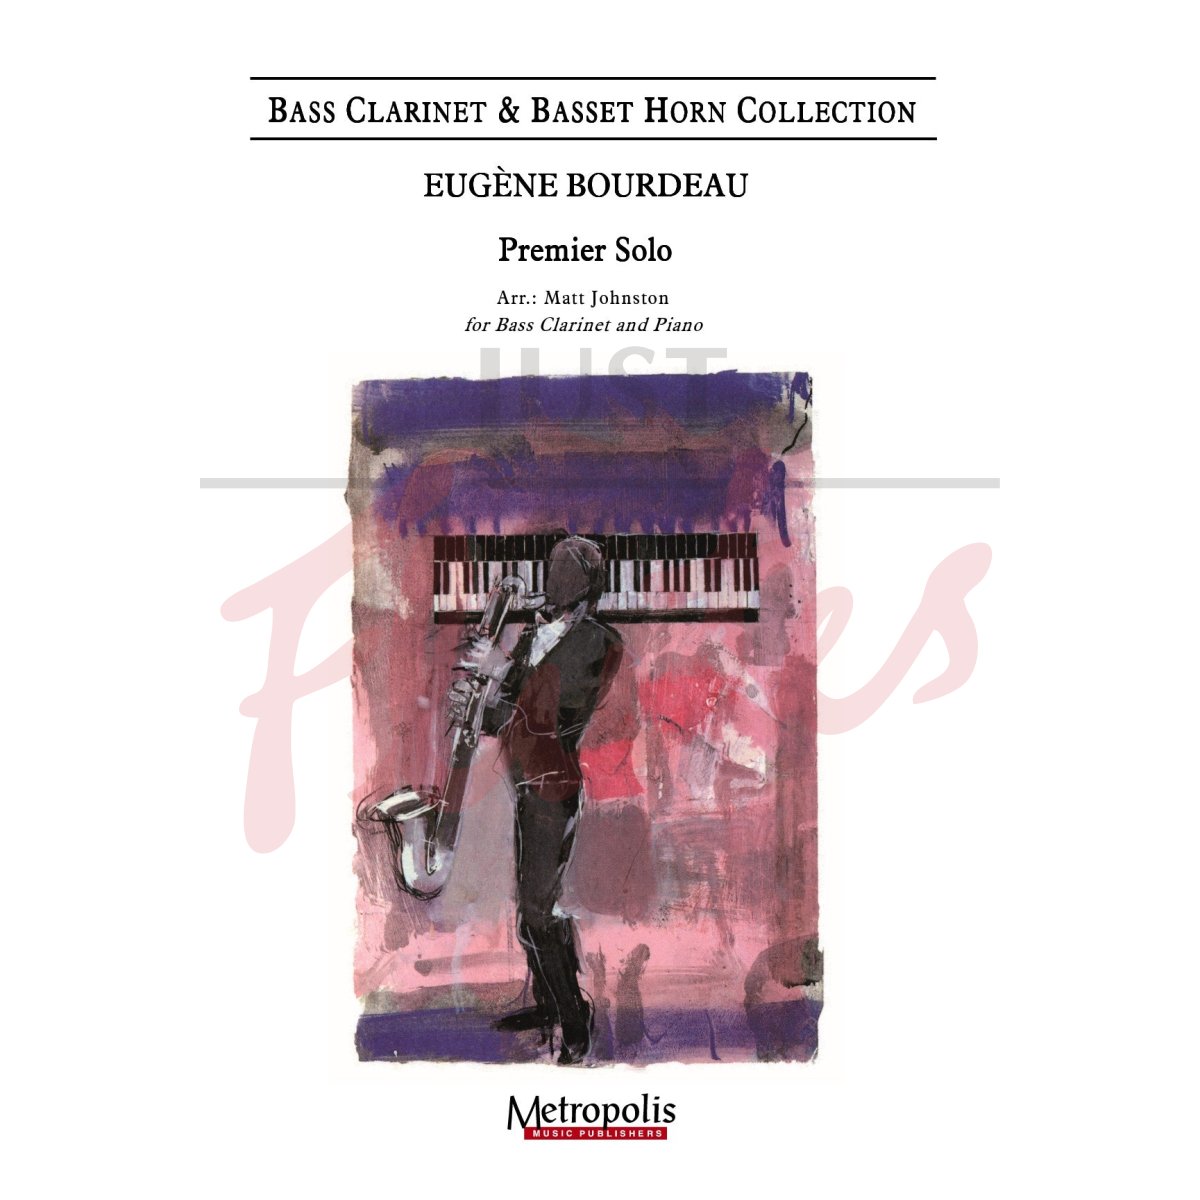 Premier Solo for Bass Clarinet and Piano